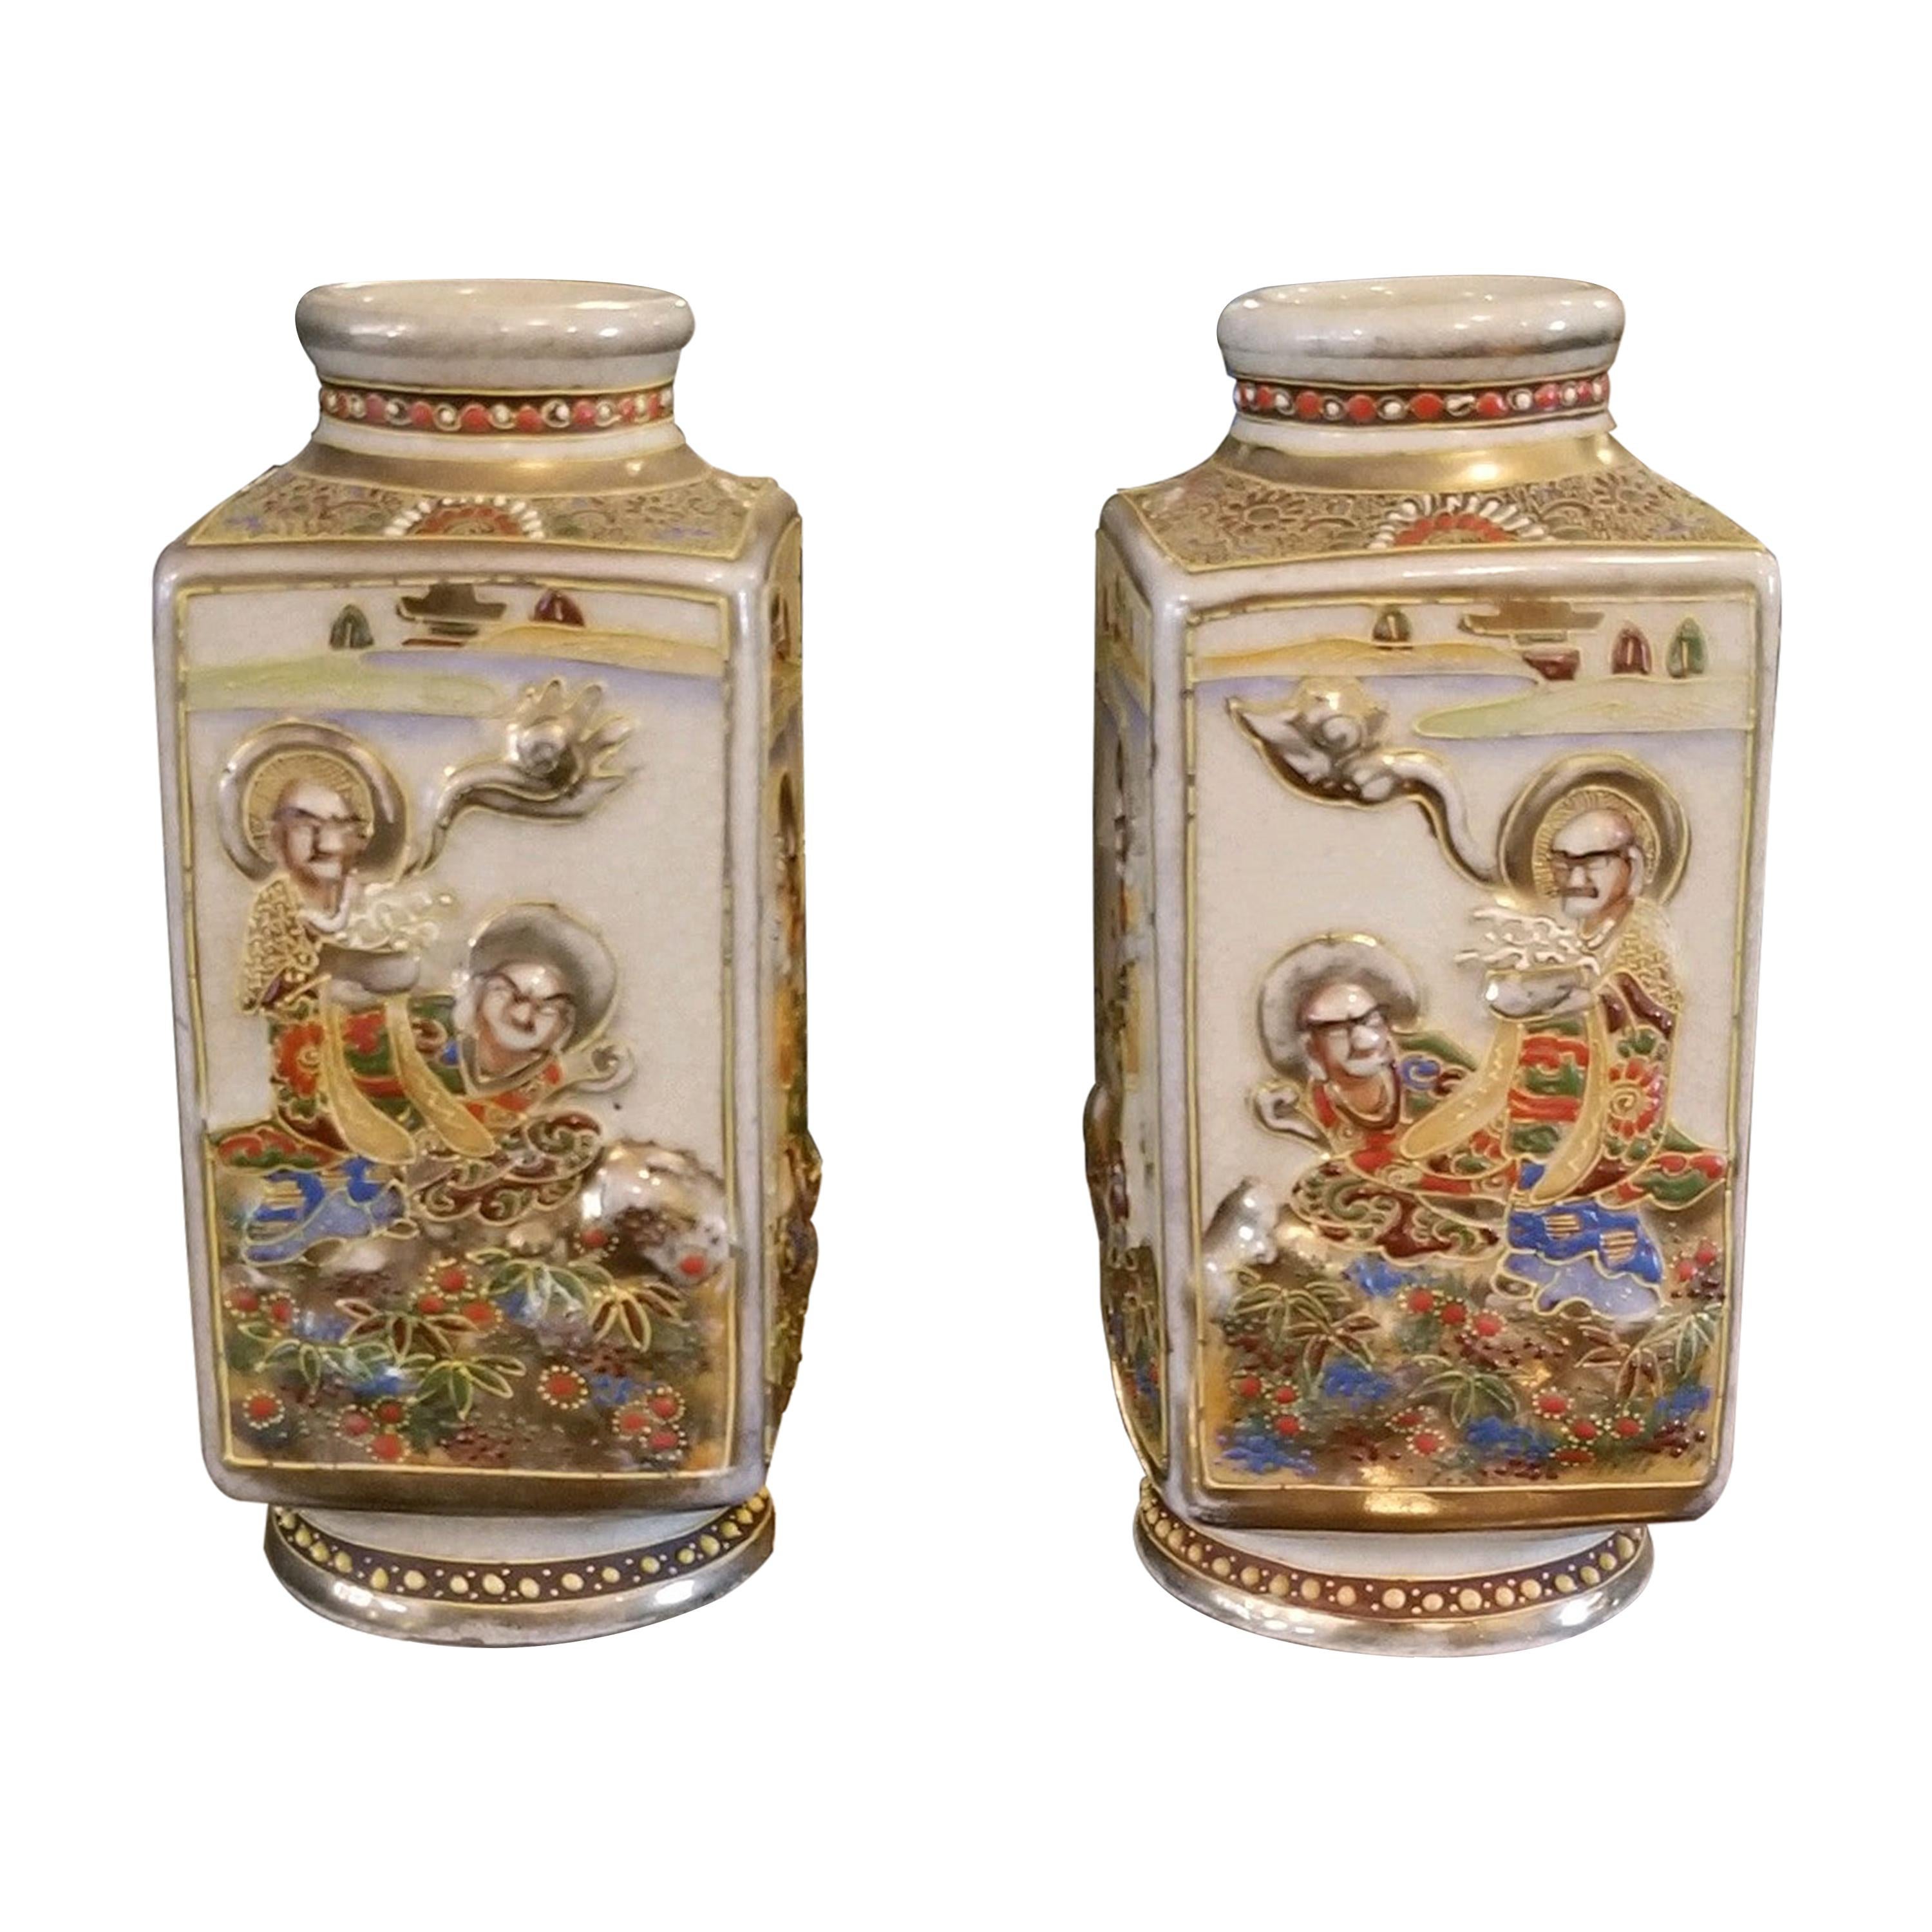 Rare Pair of Opposing Chinese Vases with Gods Motif For Sale